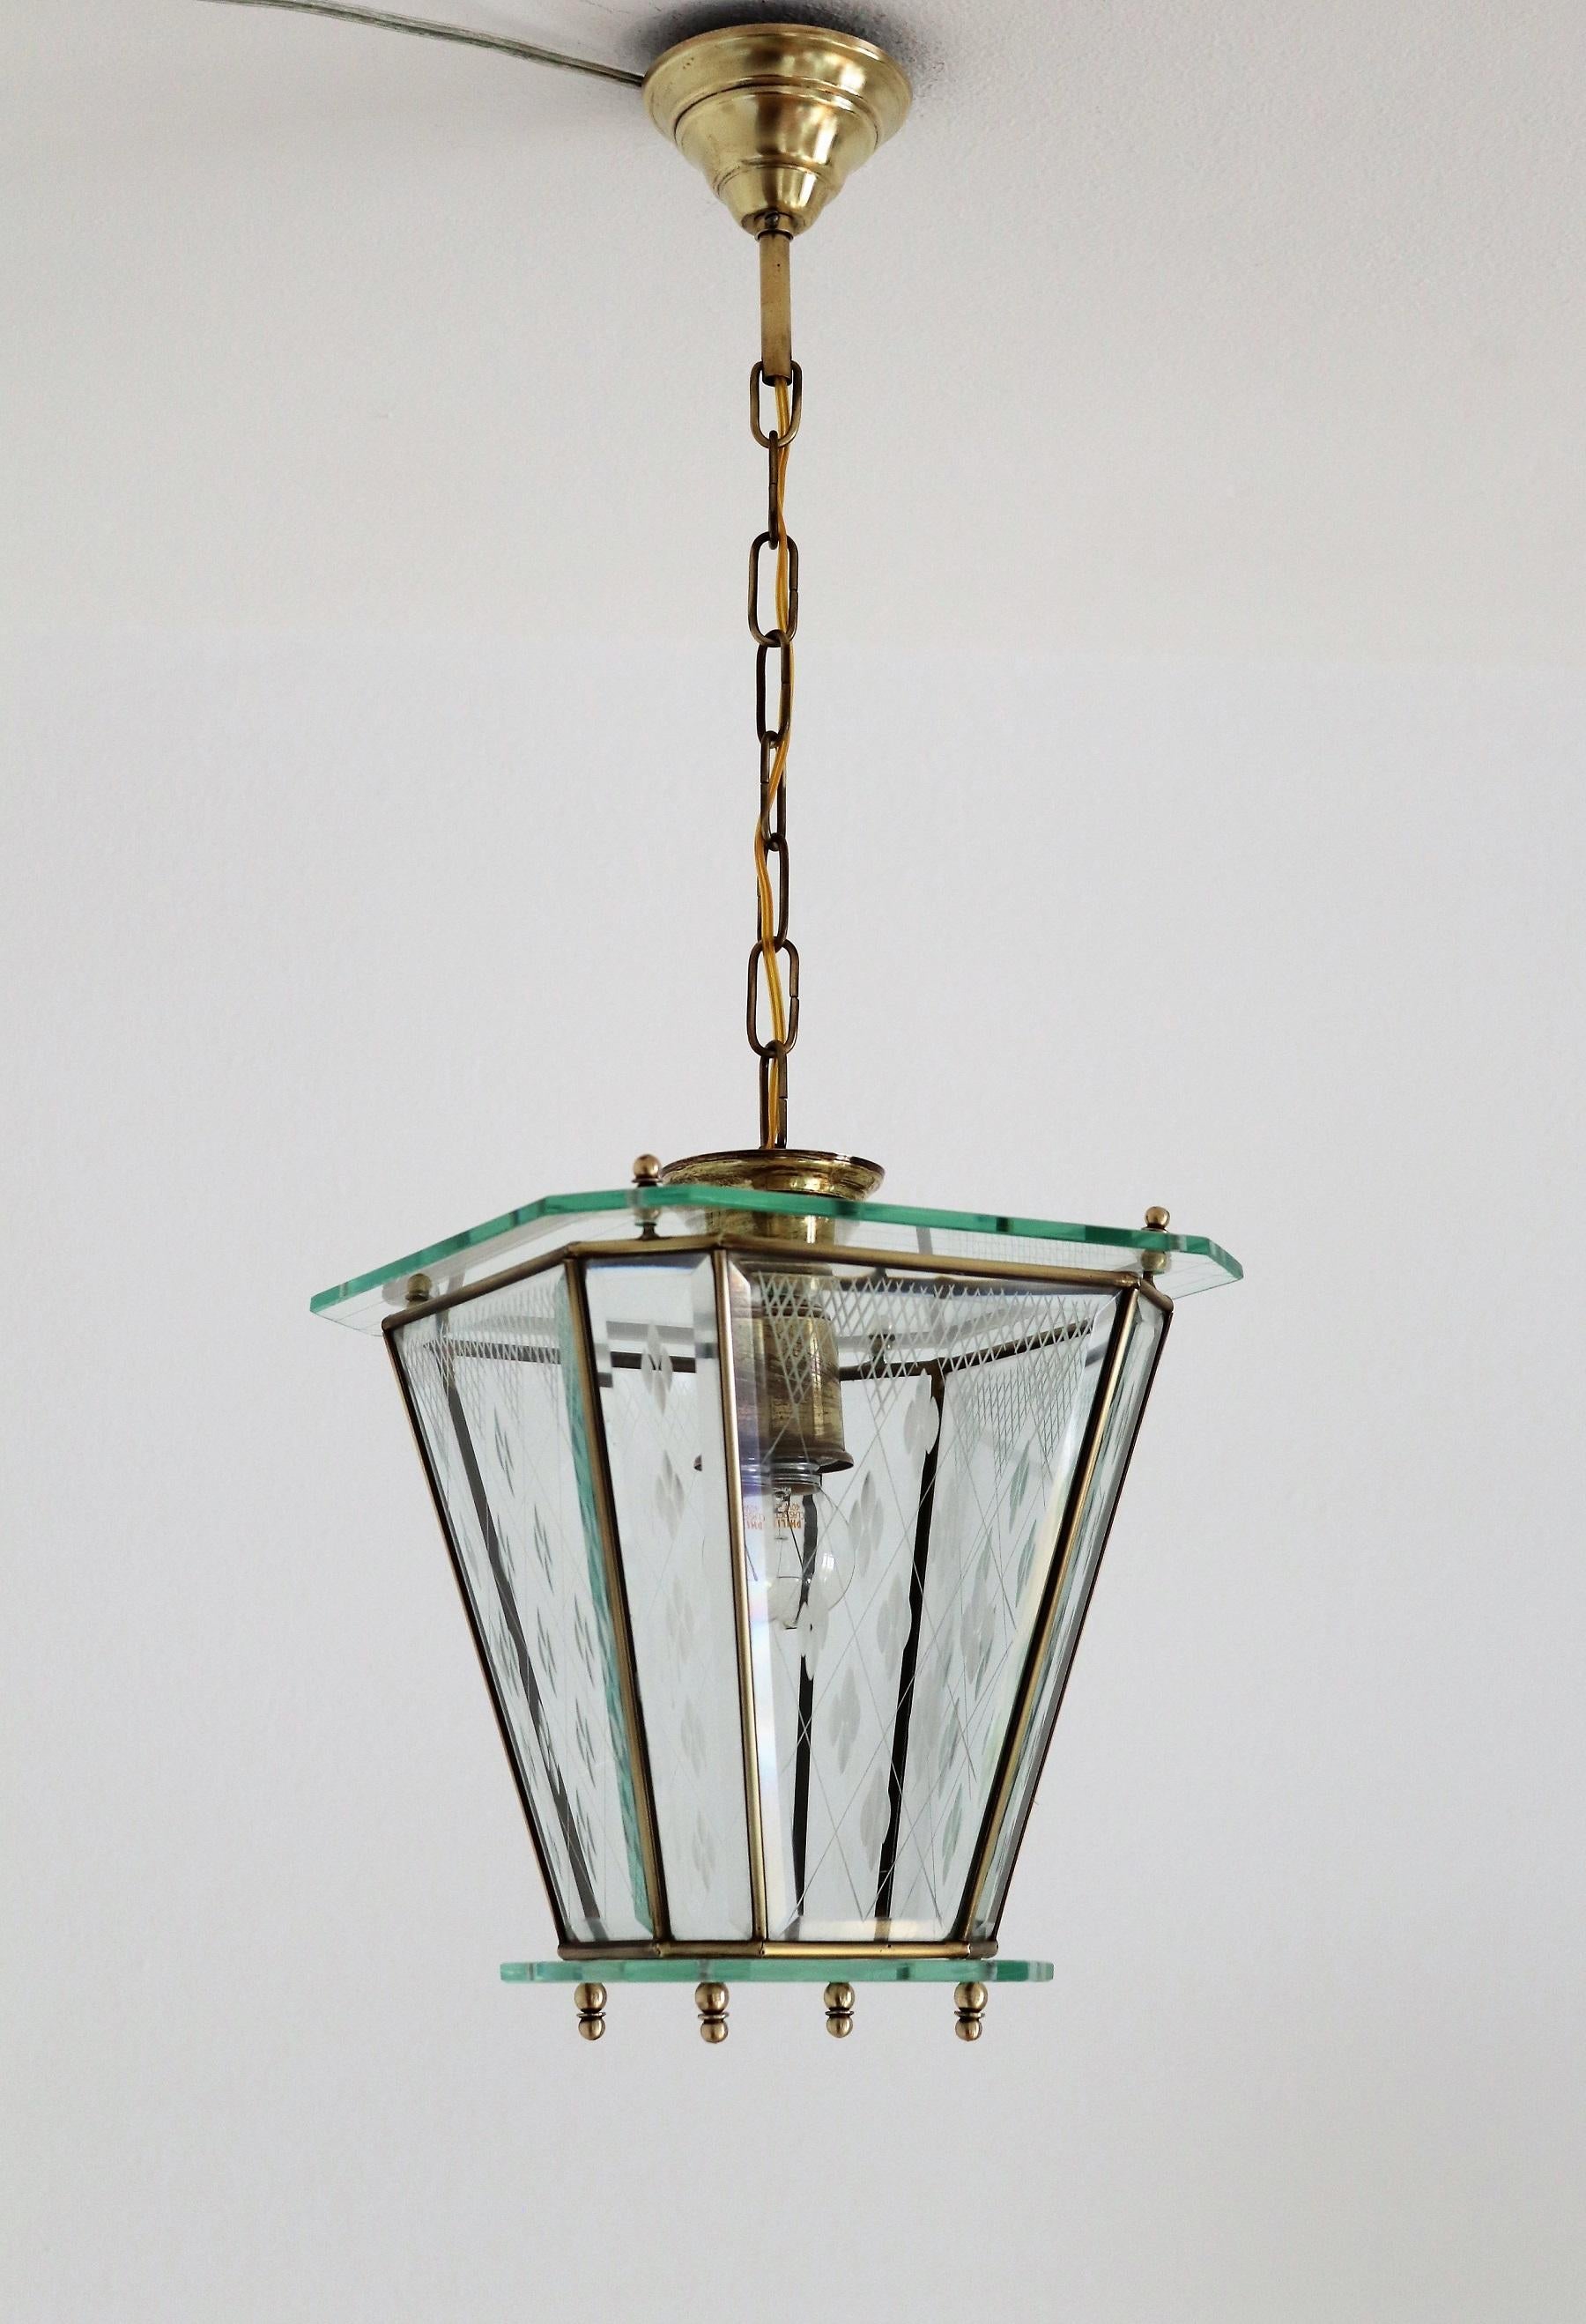 Italian Vintage Lantern in Crystal Cut Glass and Brass, 1950s For Sale 2